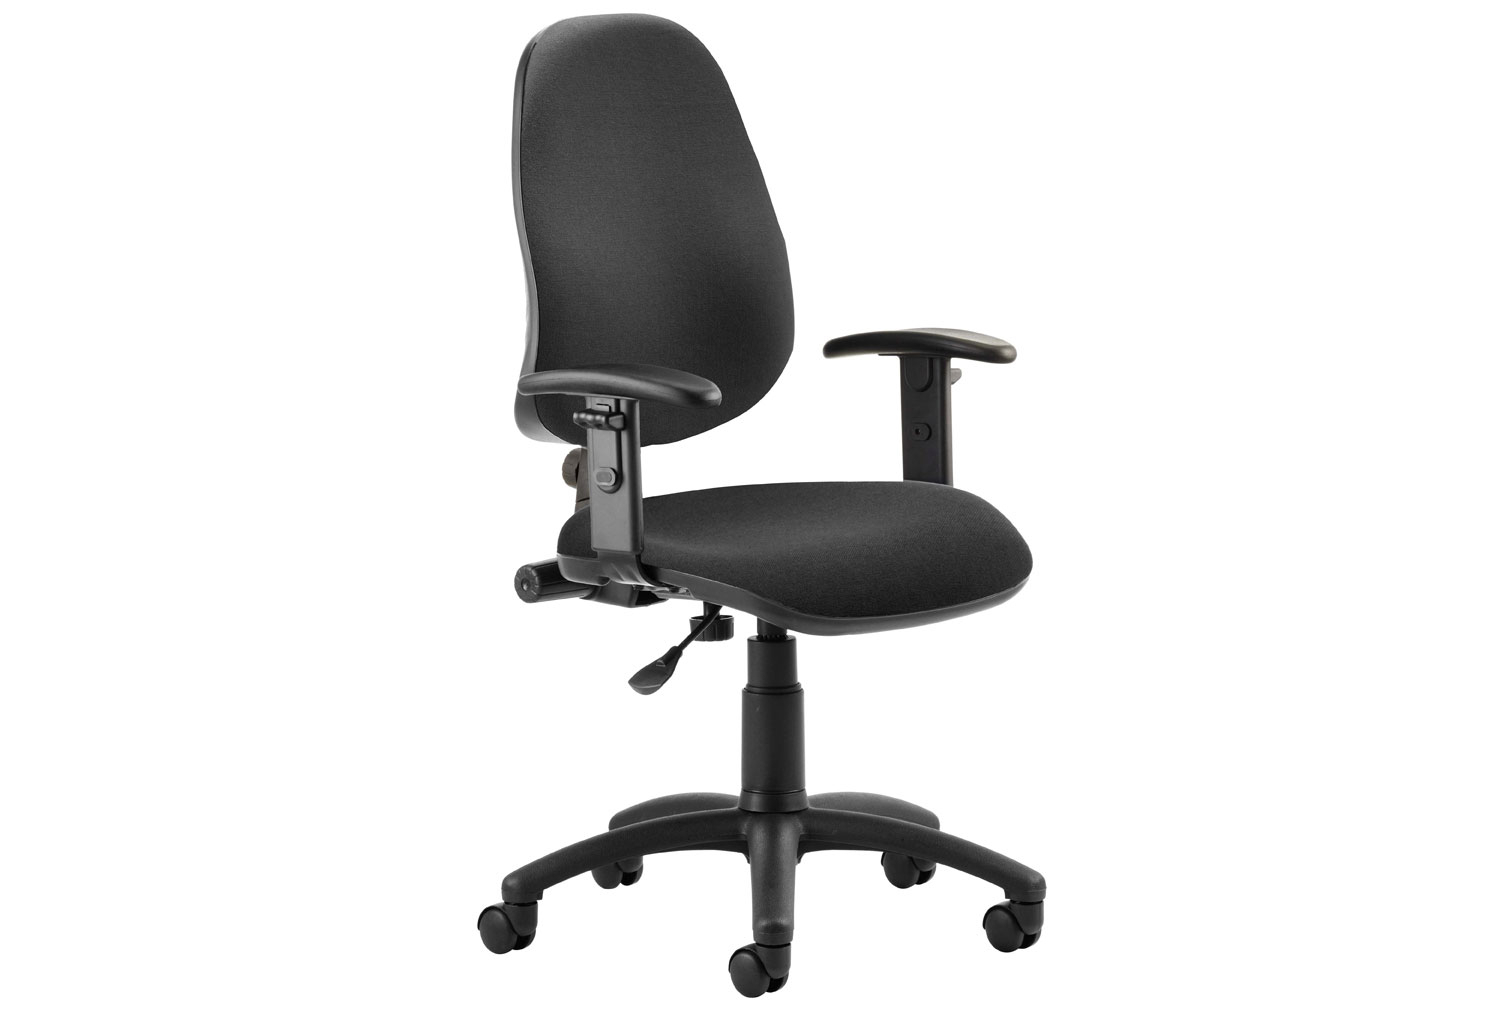 Lunar 1 Lever Operator Office Chair With Height Adjustable Arms, Black, Express Delivery